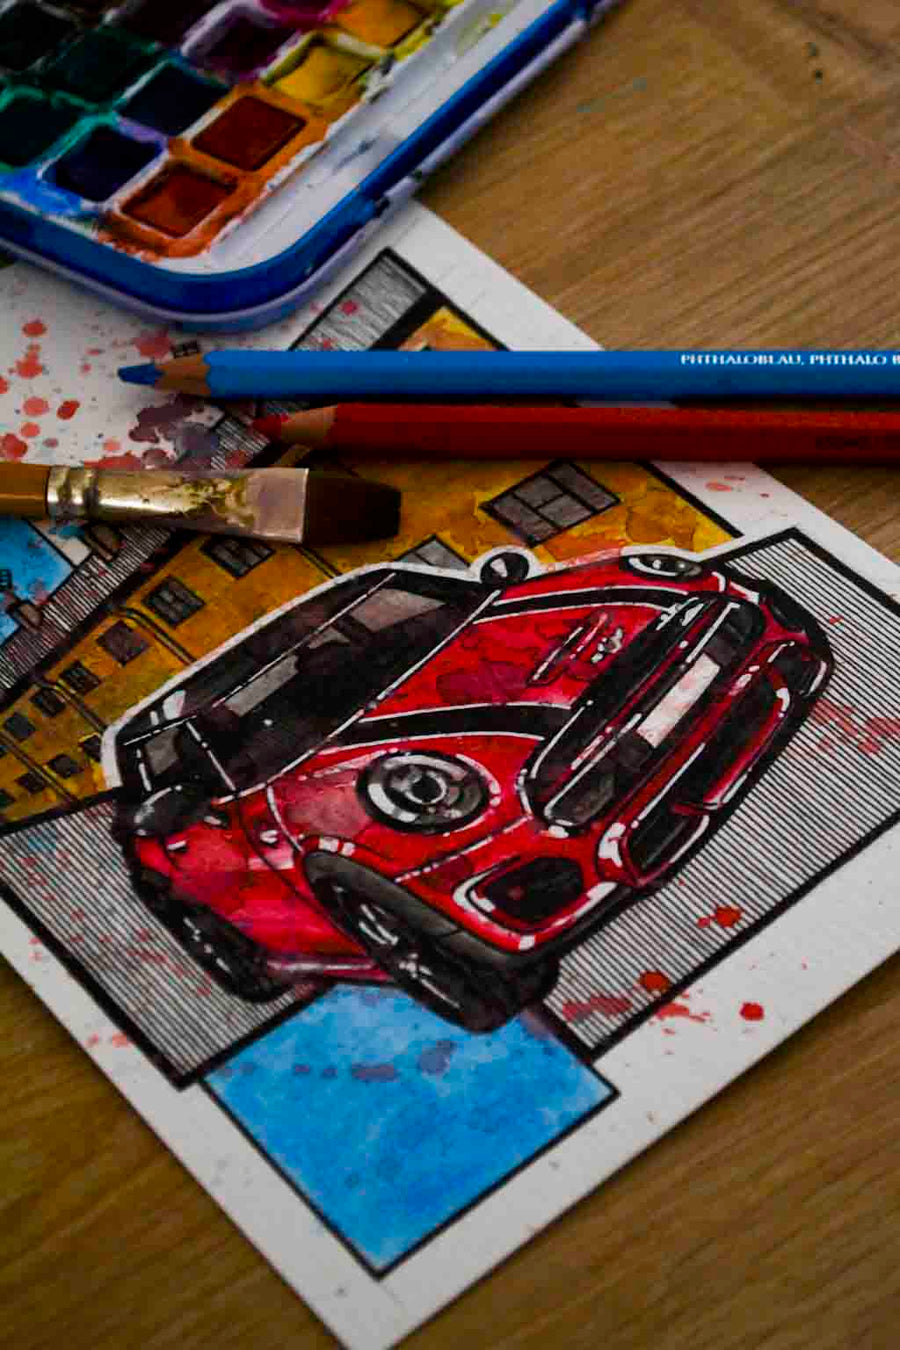 Inspiration from @j99_jpv /MINI F56 Handmade Artwork and Coloring Pages (Option Puzzle)